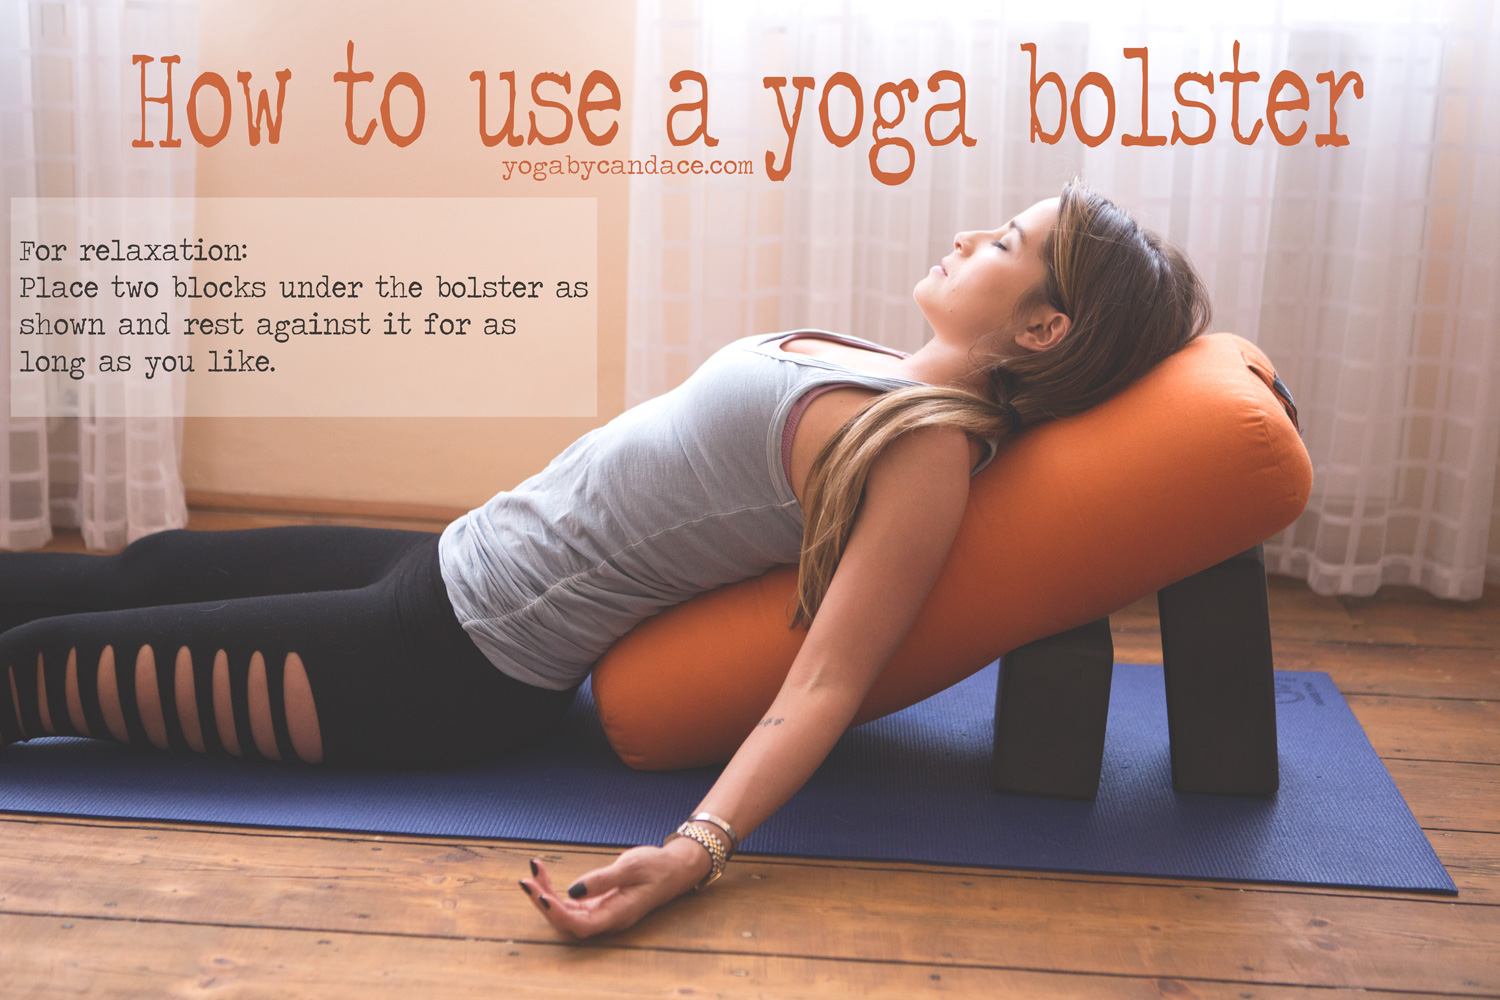 How to Use a Yoga Bolster — YOGABYCANDACE